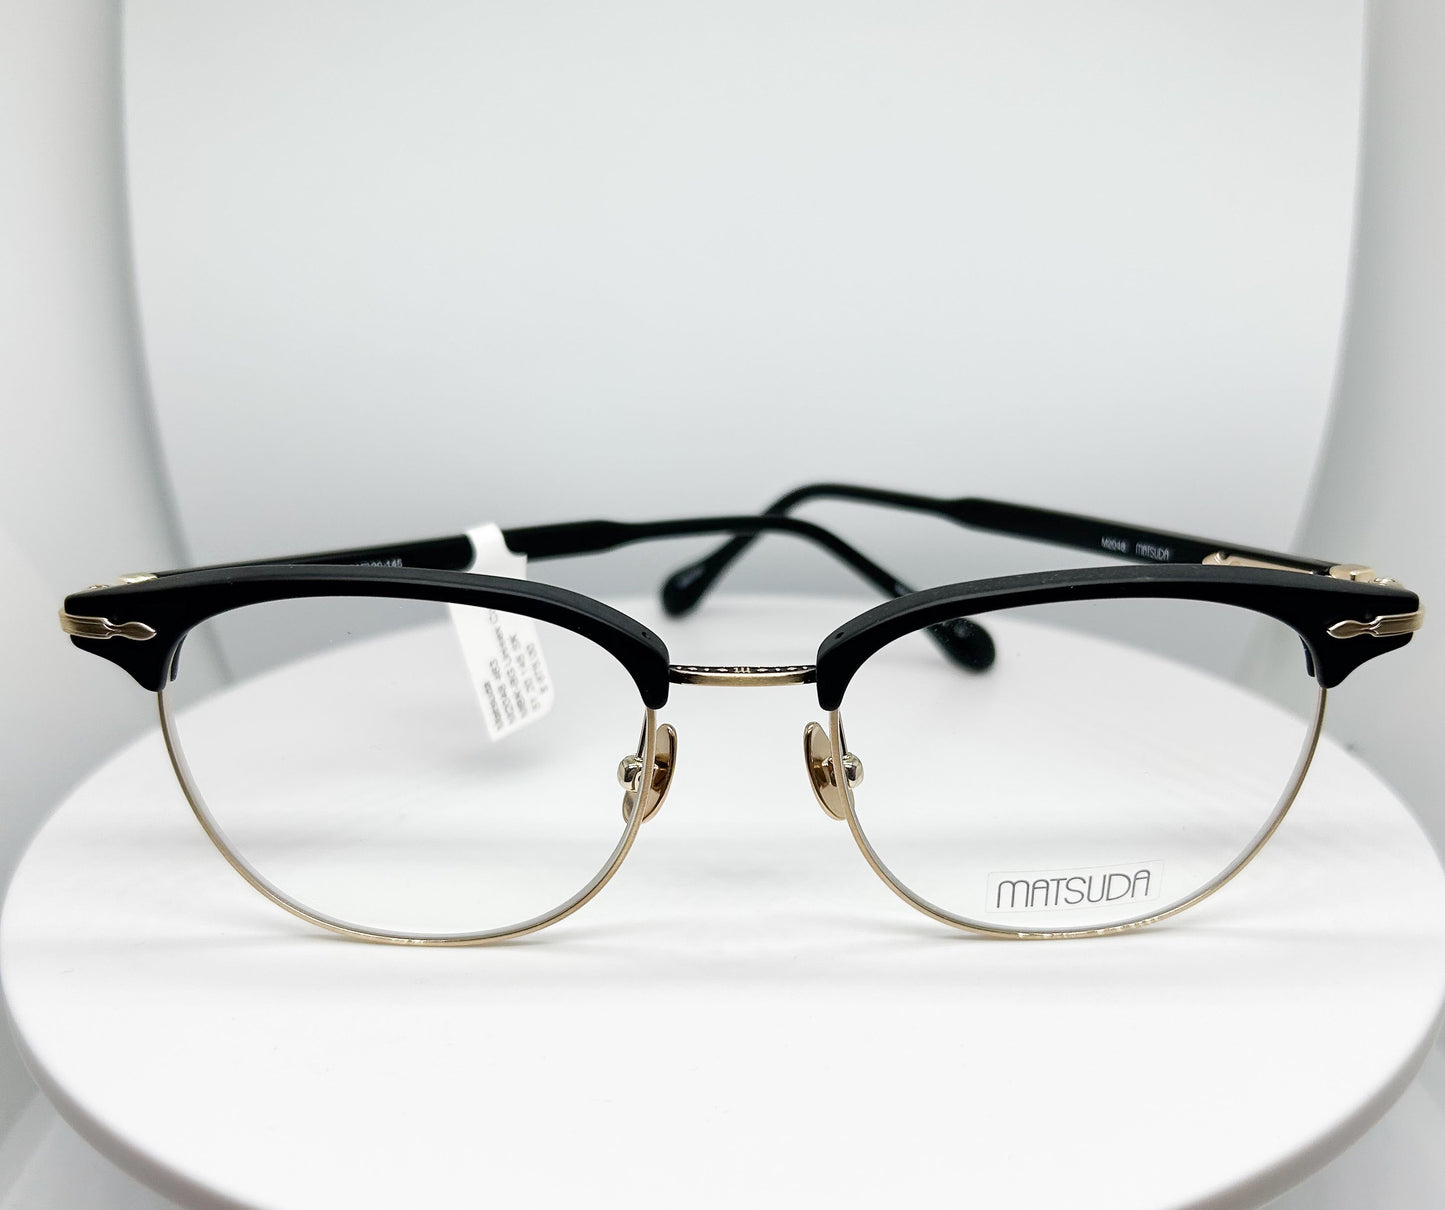 <p>Matsuda  M2048 is a  Matte Black & Brushed Gold, Titanium & Acetate Optical Frame with a Clubmaster shape.</p><p>Shop with confidence from Adair Eyewear, a MATSUDA Authorized Dealer.  We have provided the best in customer service and great designer eyweear for over 40 years.</p>